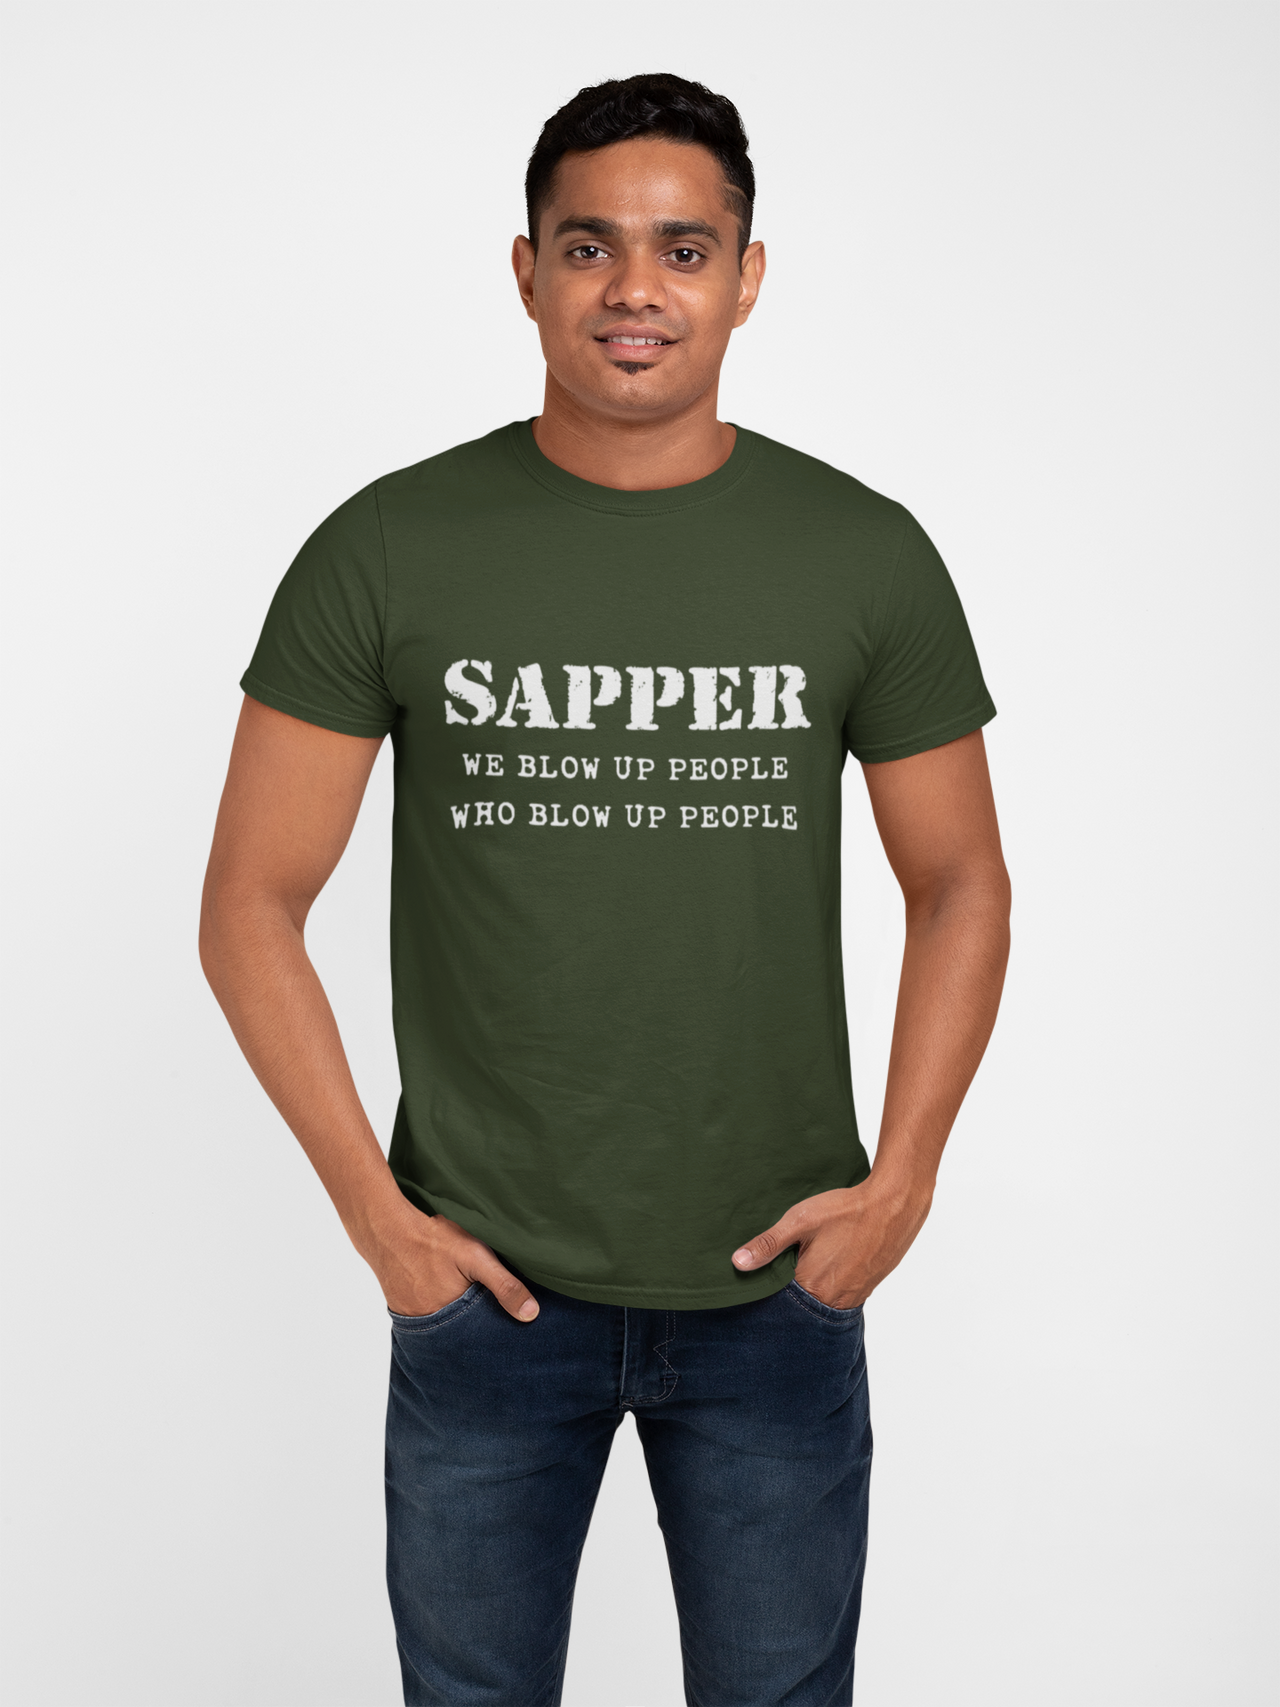 Sapper T-shirt - We Blow Up People, Who Blow Up People (Men)